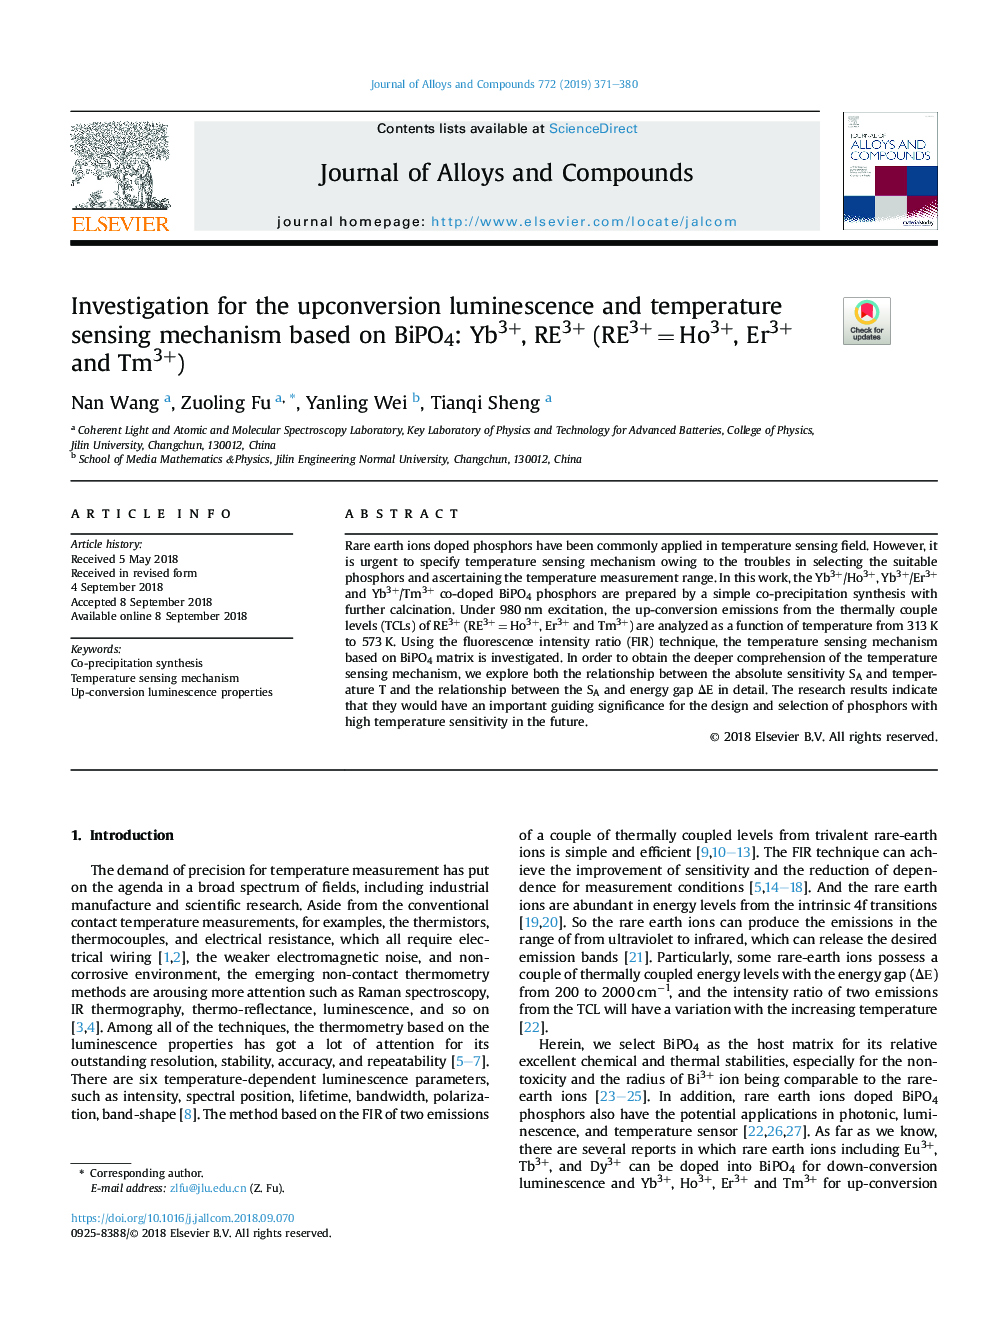 Investigation for the upconversion luminescence and temperature sensing mechanism based on BiPO4: Yb3+, RE3+ (RE3+â¯=â¯Ho3+, Er3+ and Tm3+)